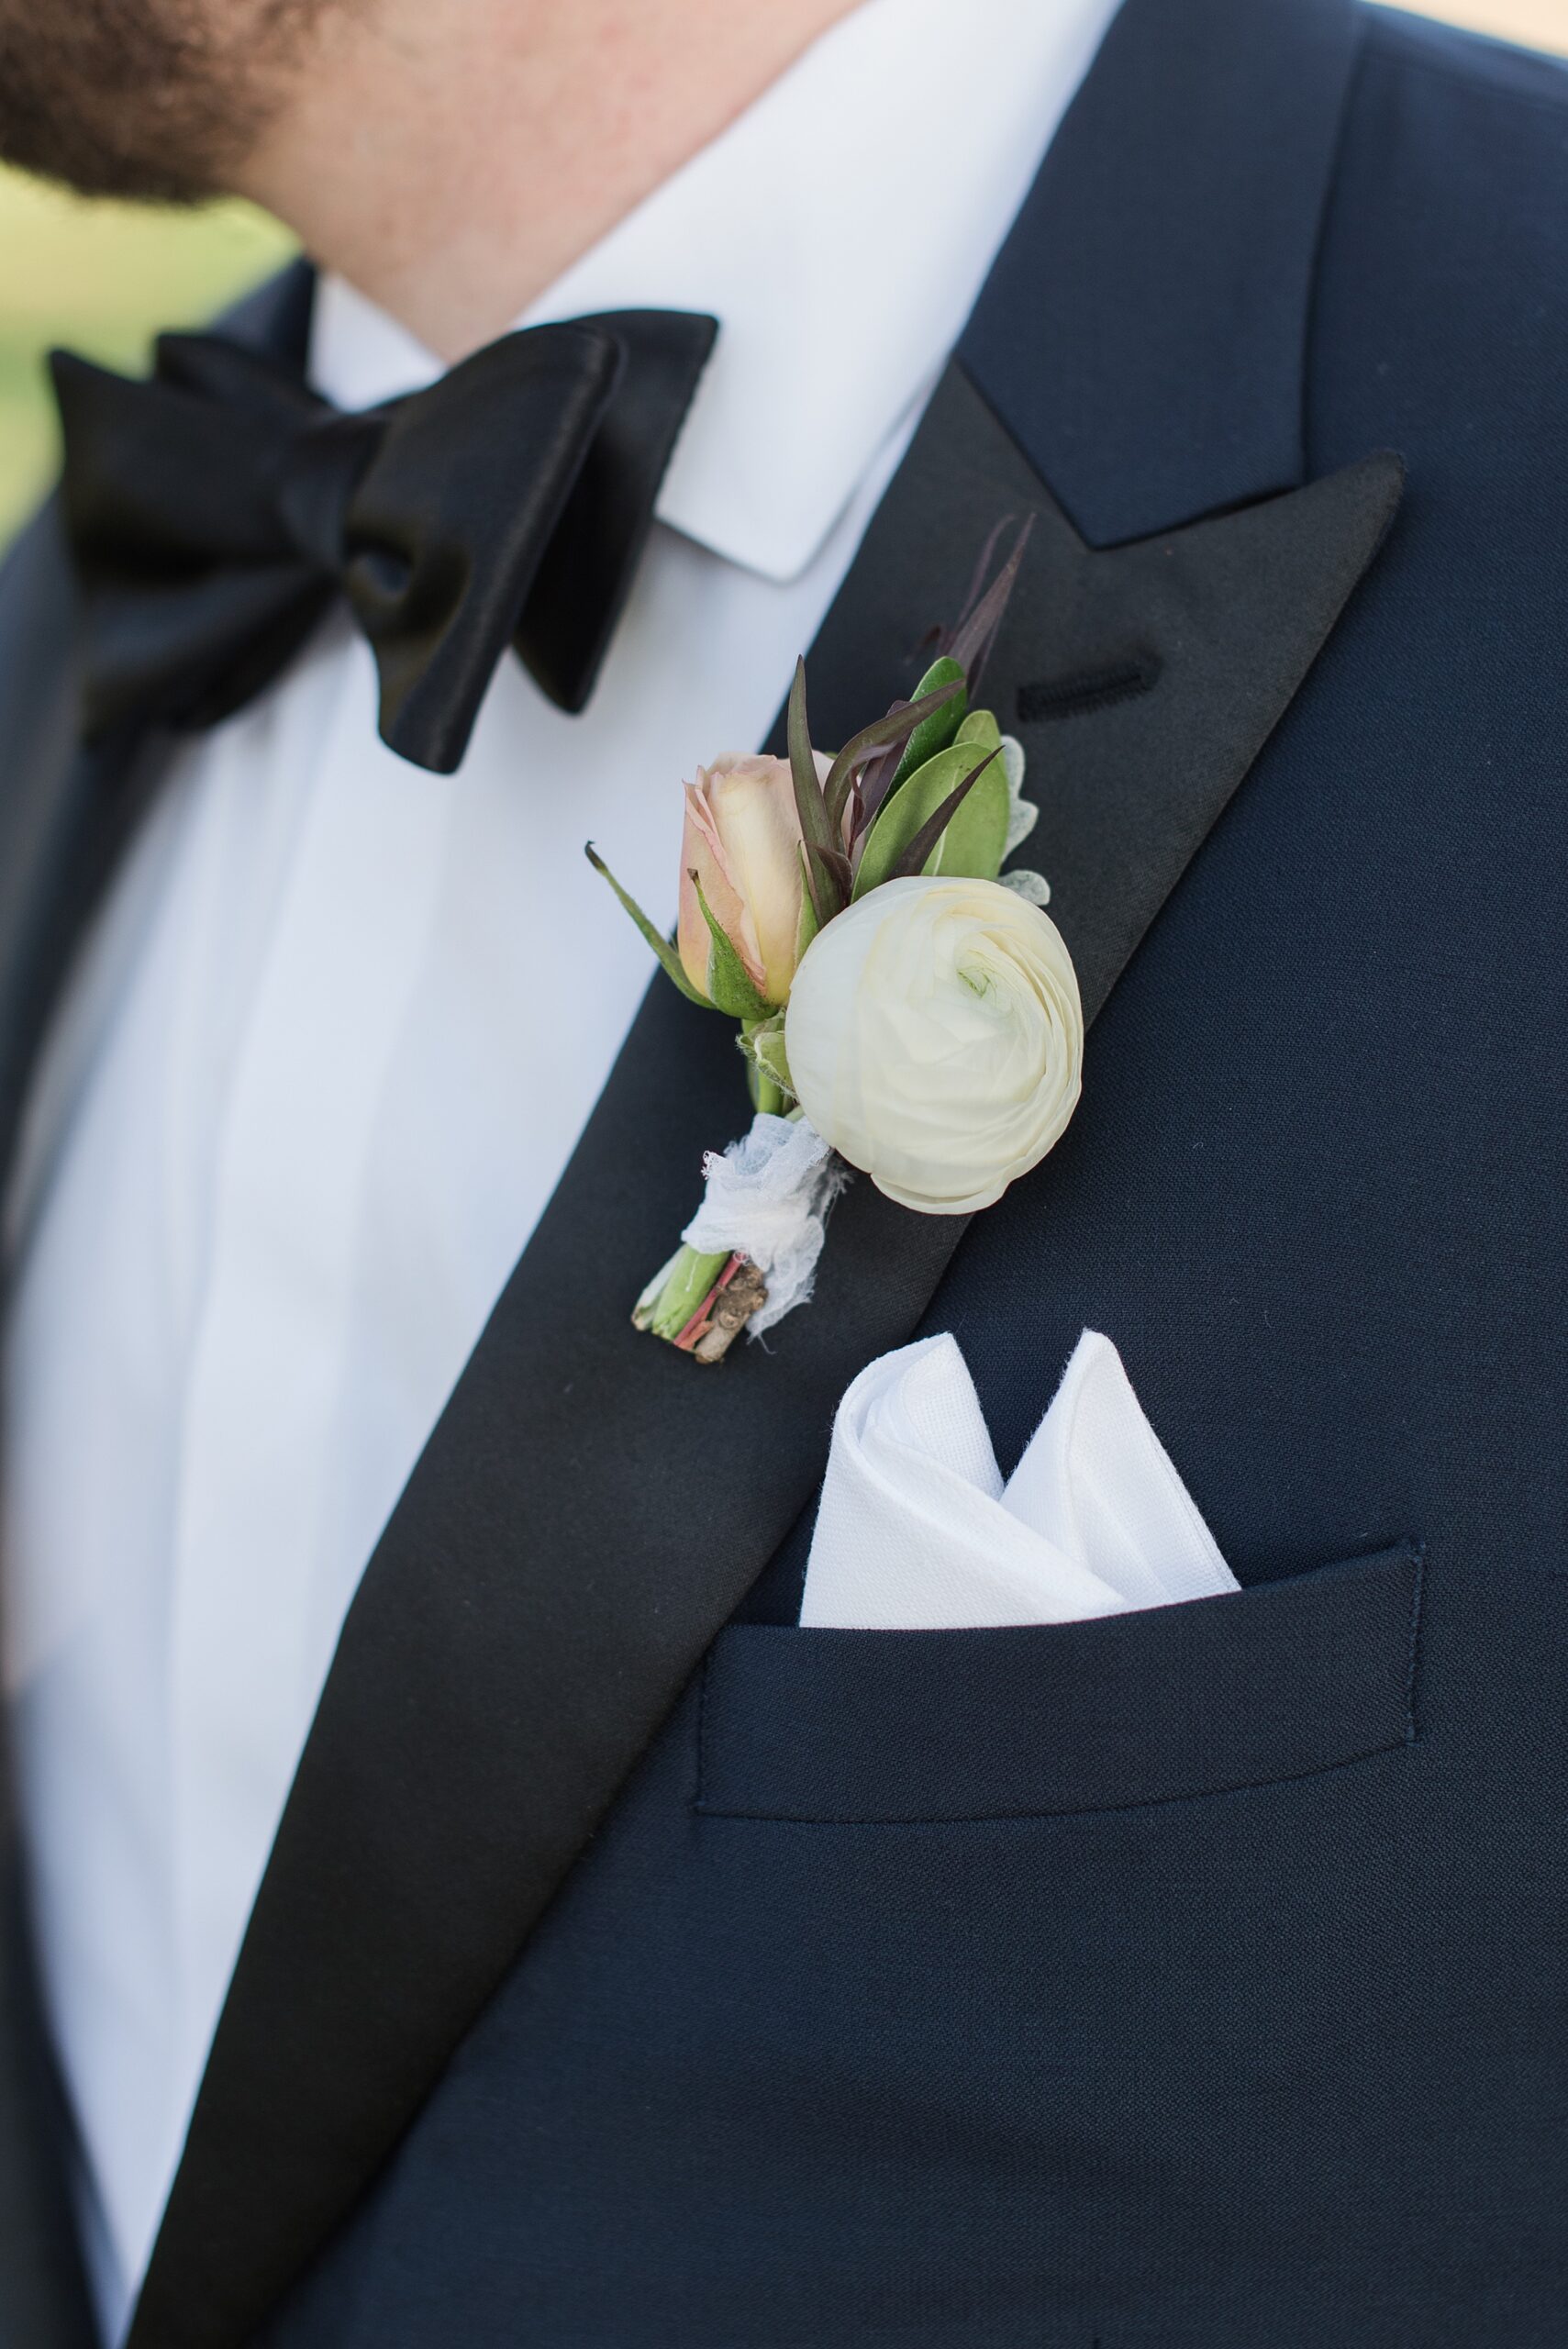 Details of a groom's boutonniere on a blue and black suit